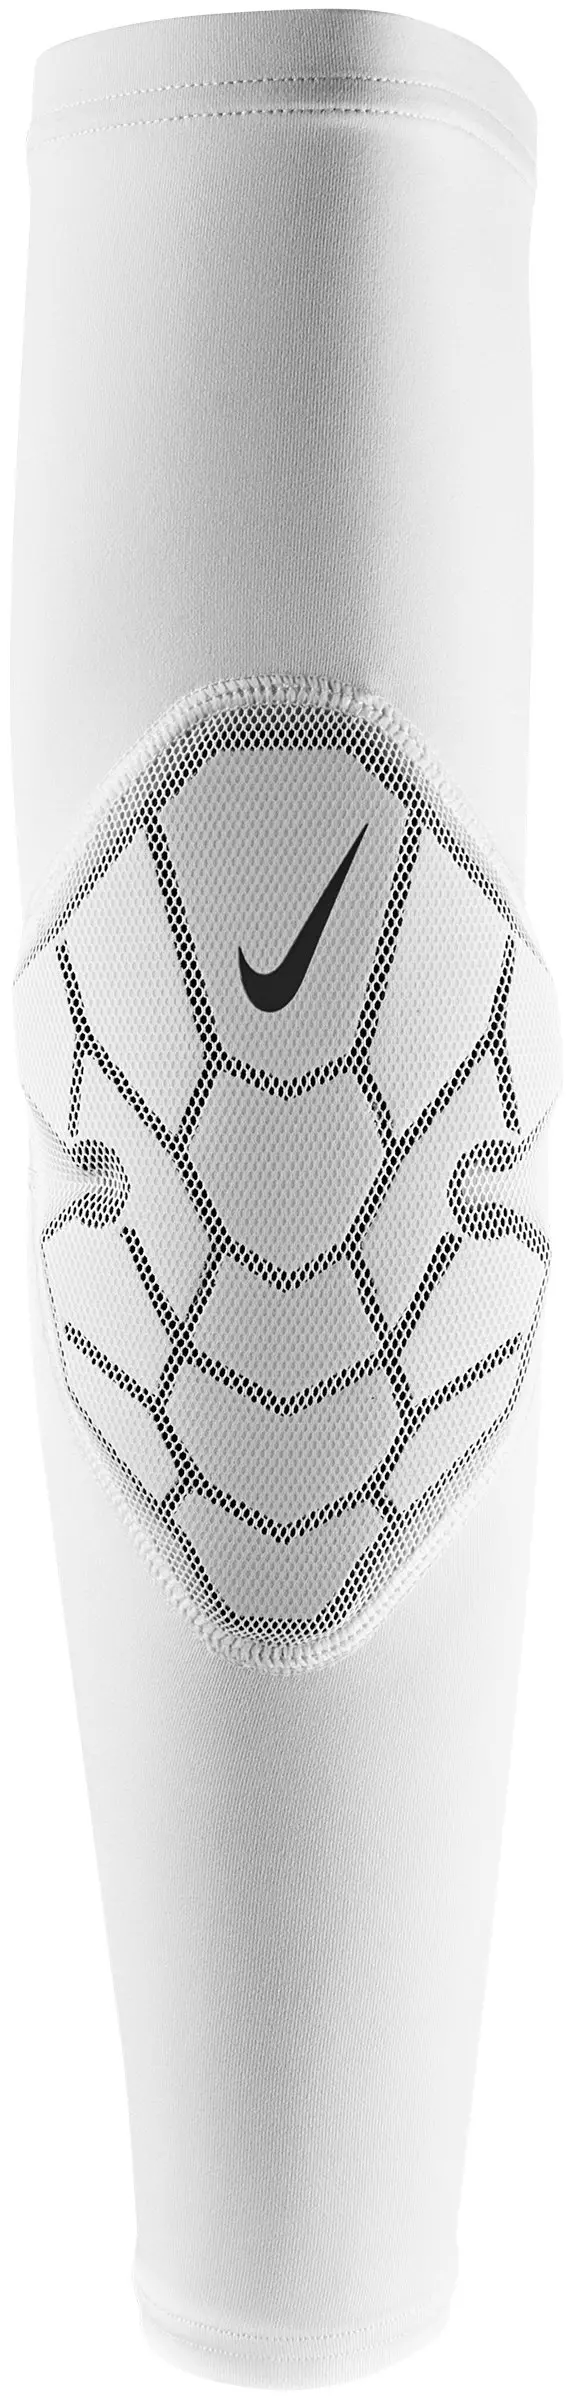 Nike Pro Hyperstrong Padded Compression Pants Men's White New without Tags